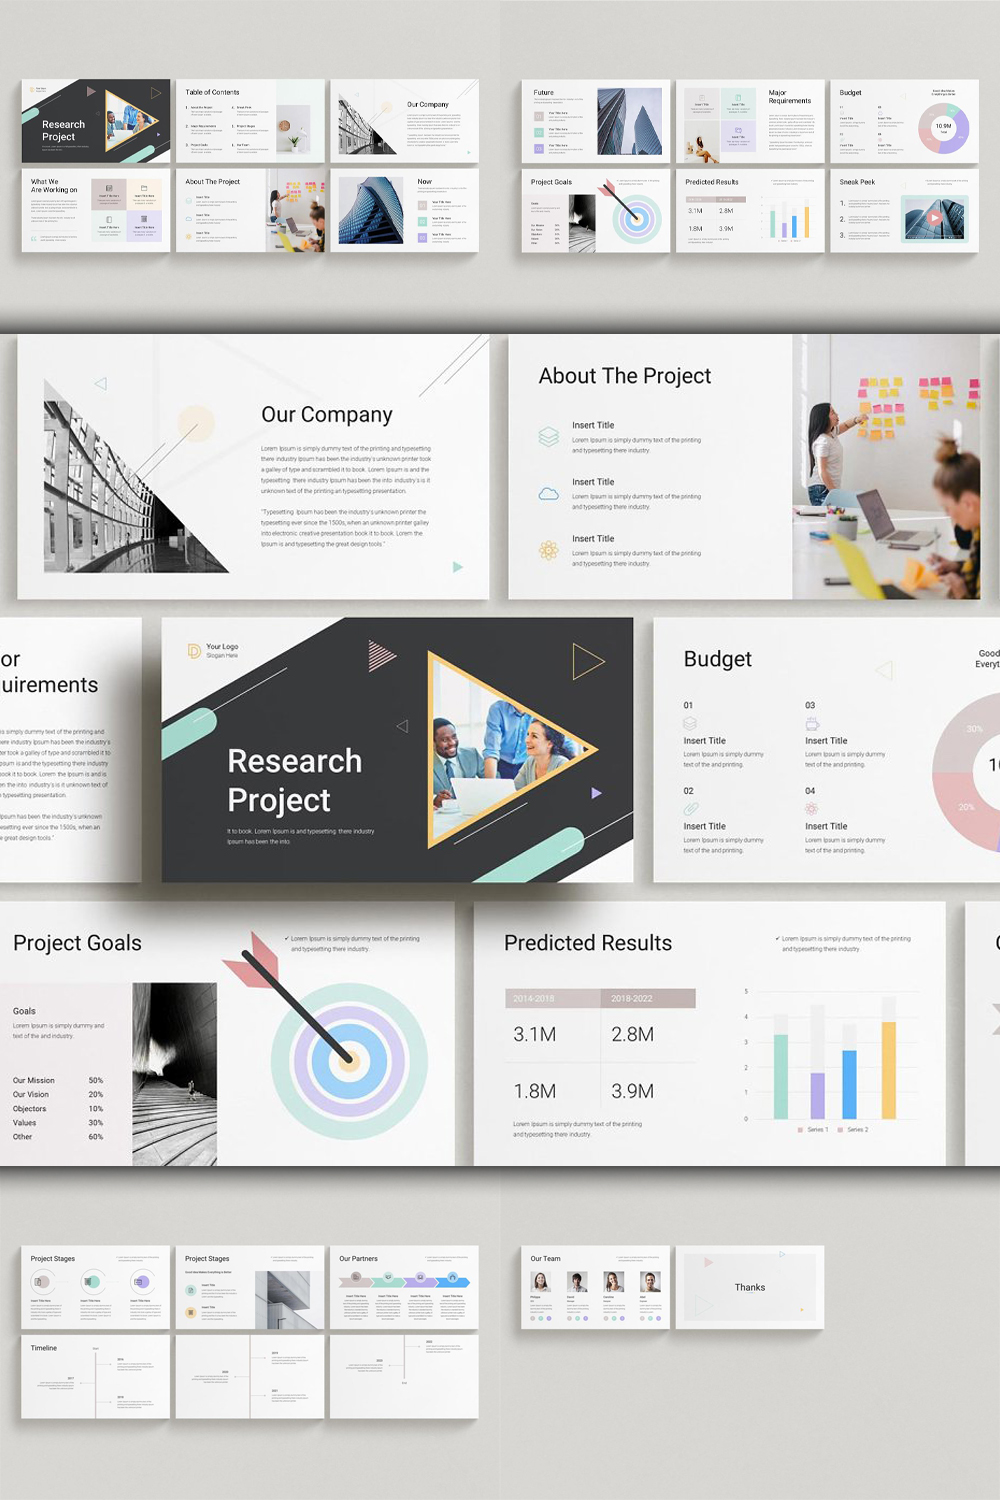 Research project proposal of pinterest.